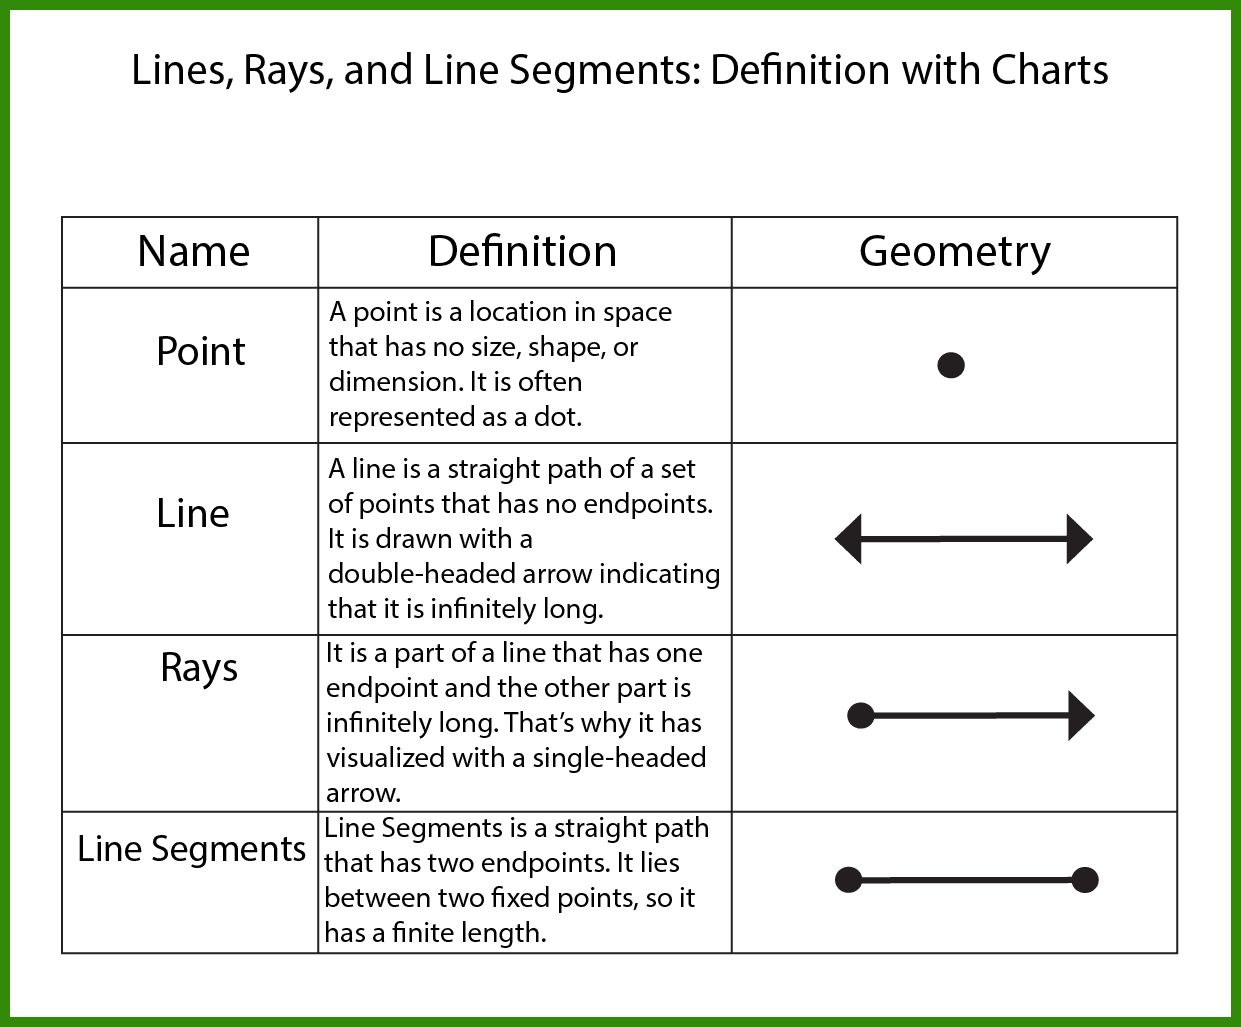 1-Definition chart of Lines, Rays, and Line Segments